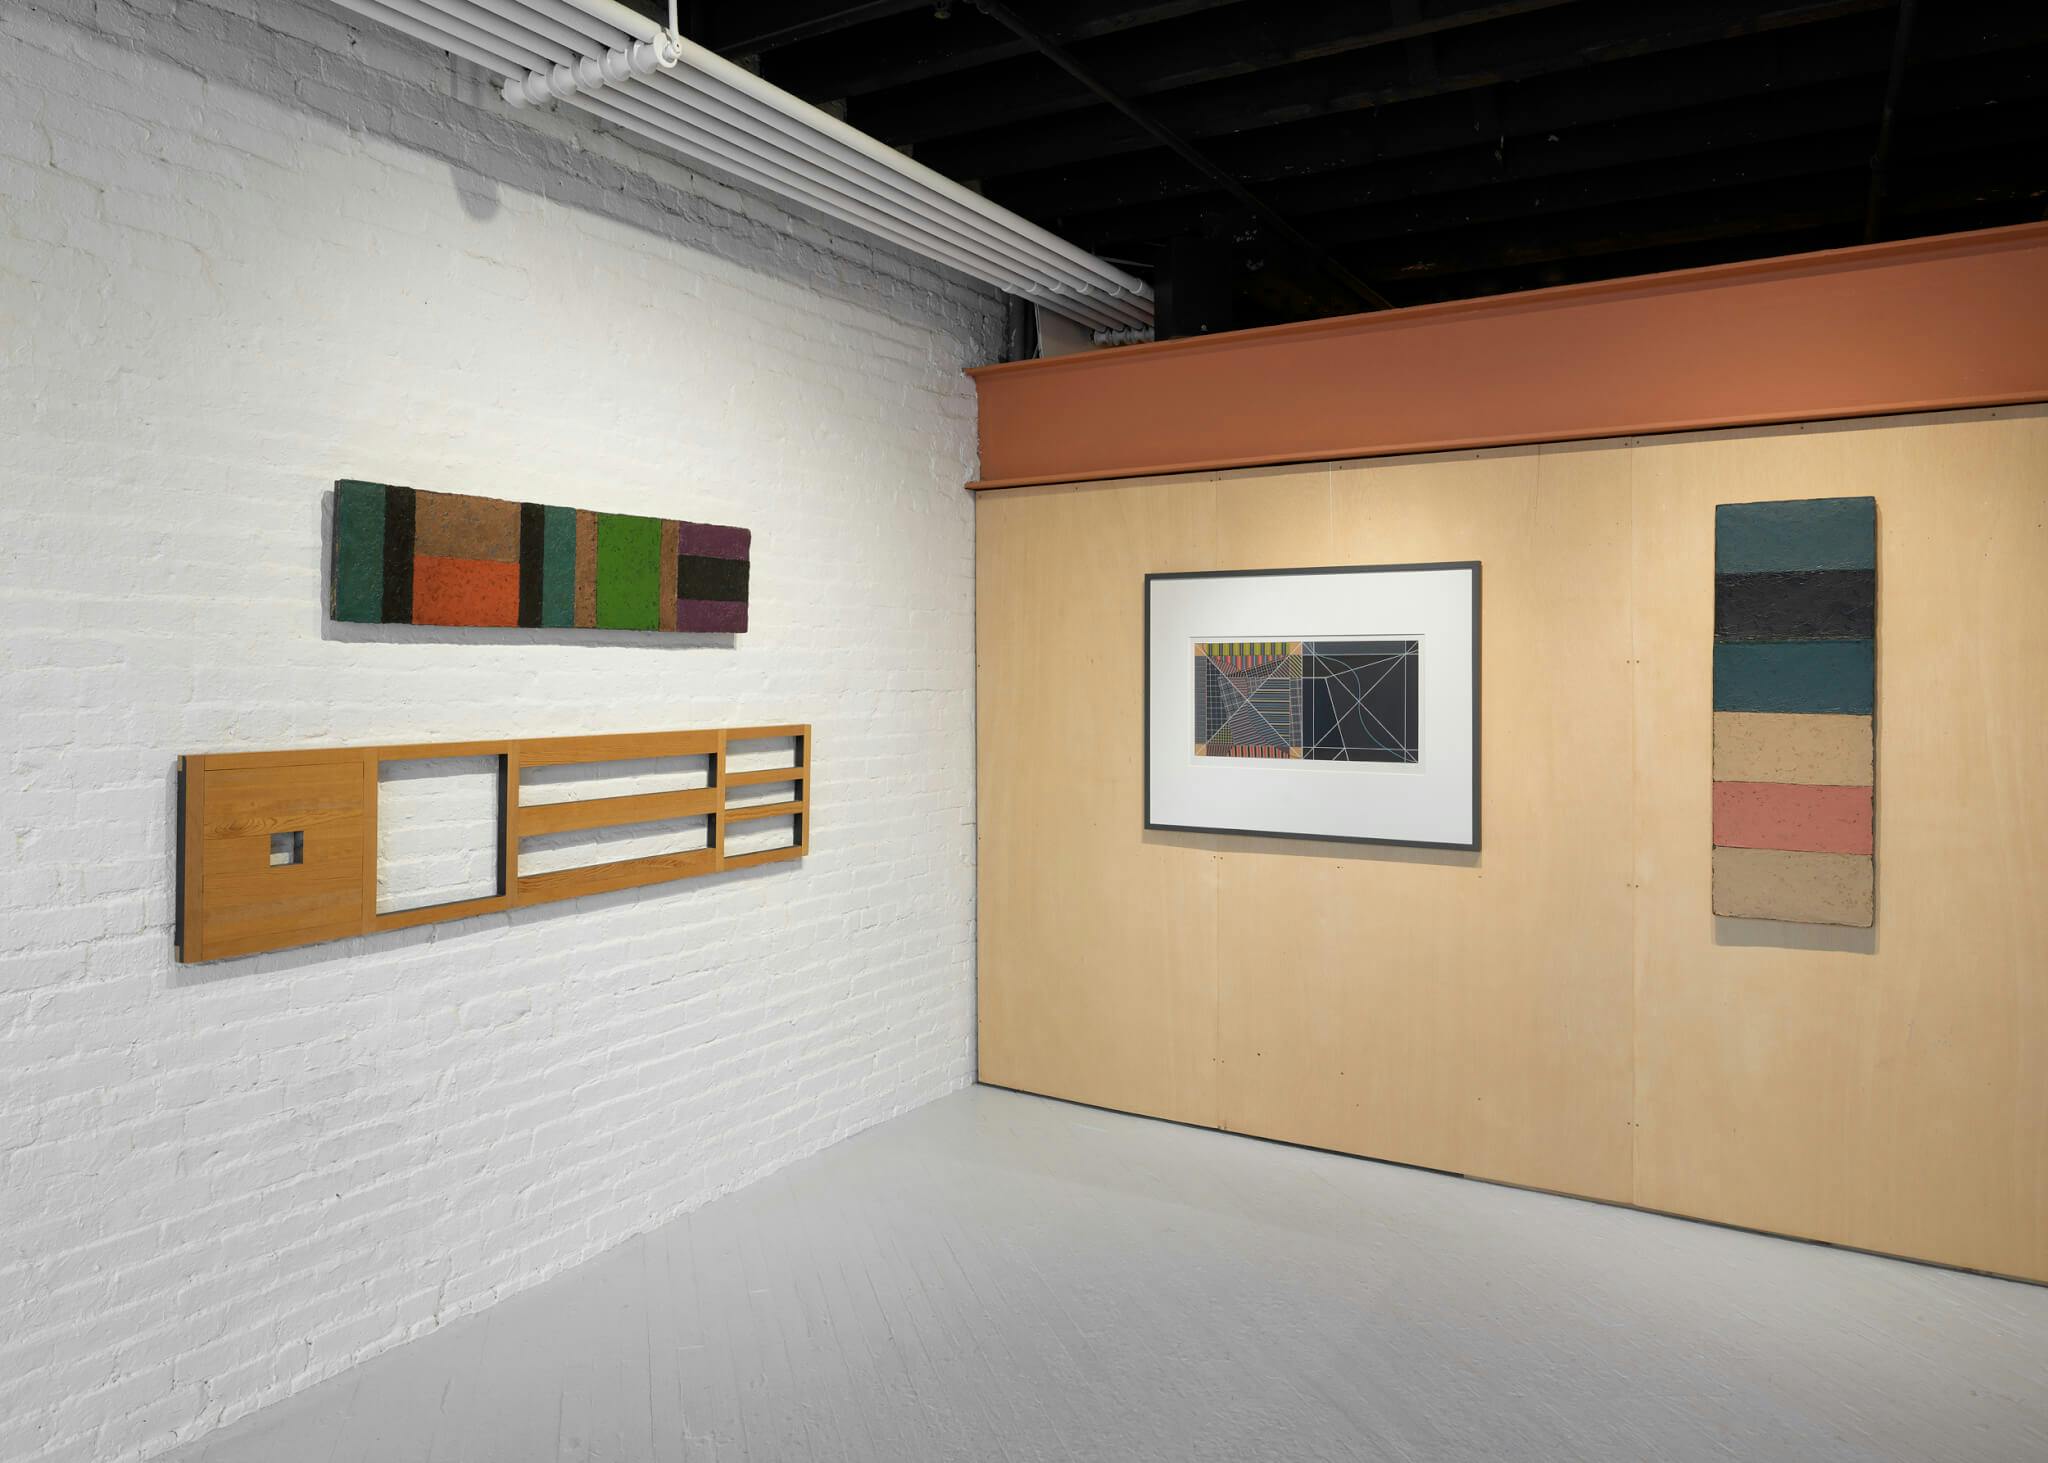 An installation view of the Rob Moore Retrospective. The image is a view of a corner -- on the white wall to the left are to rectangular works, and on the light-brown wall to the right is a framed piece next to another rectangular work.